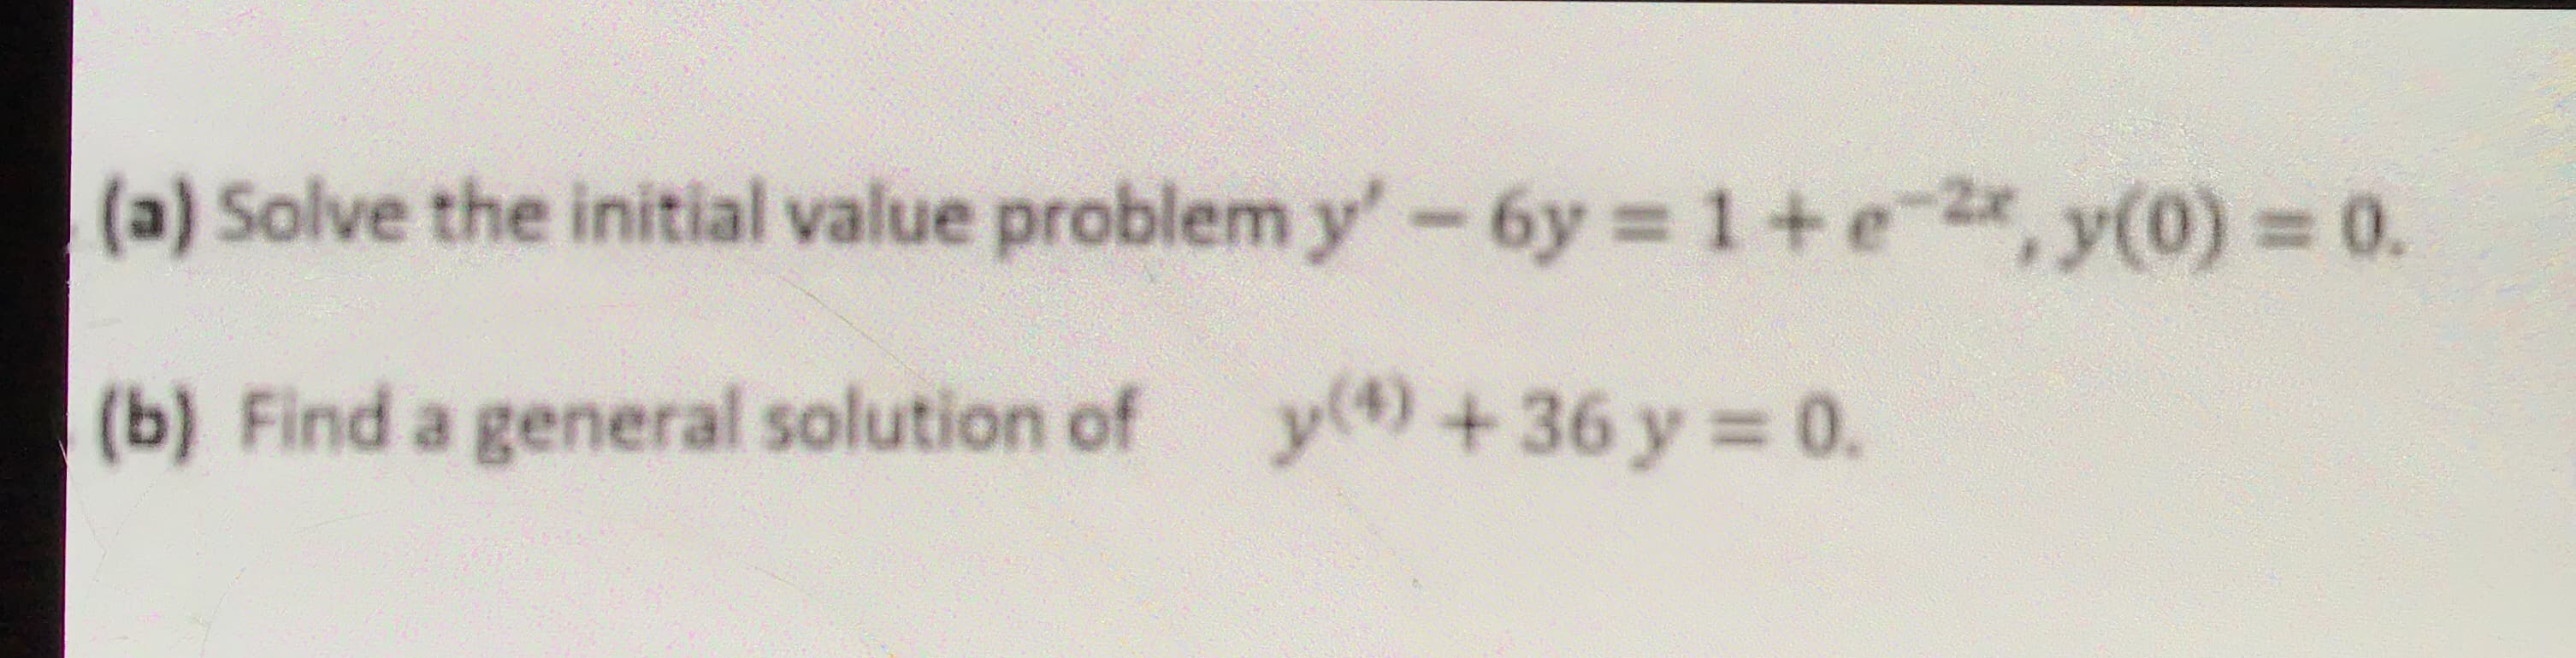 Solve the initial value problem y'-6y 1+e 2x, y(0) 0.
